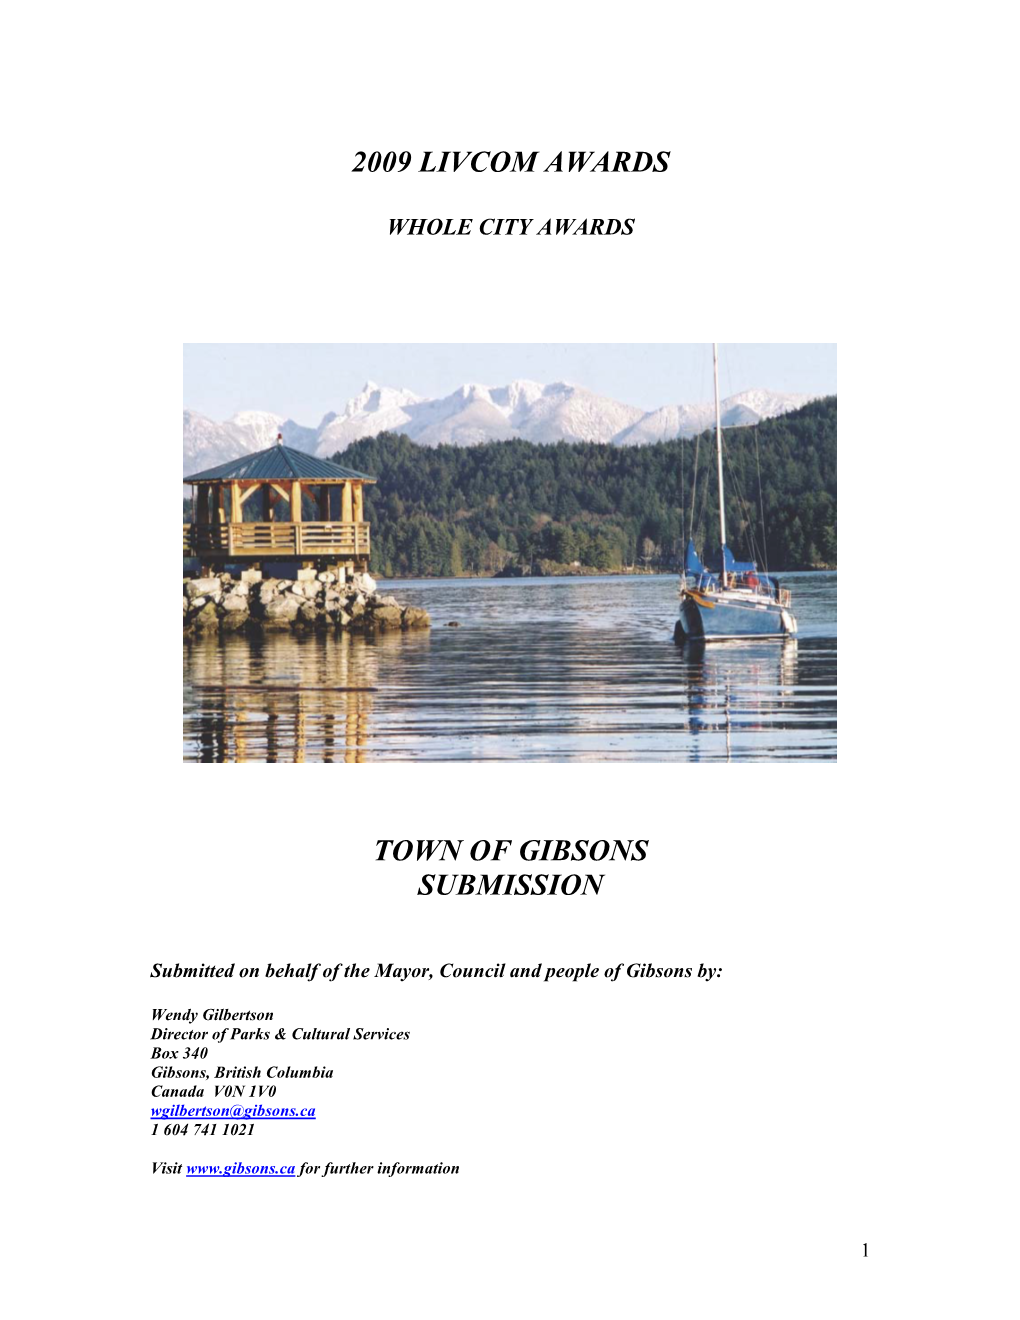 Town of Gibsons Submission